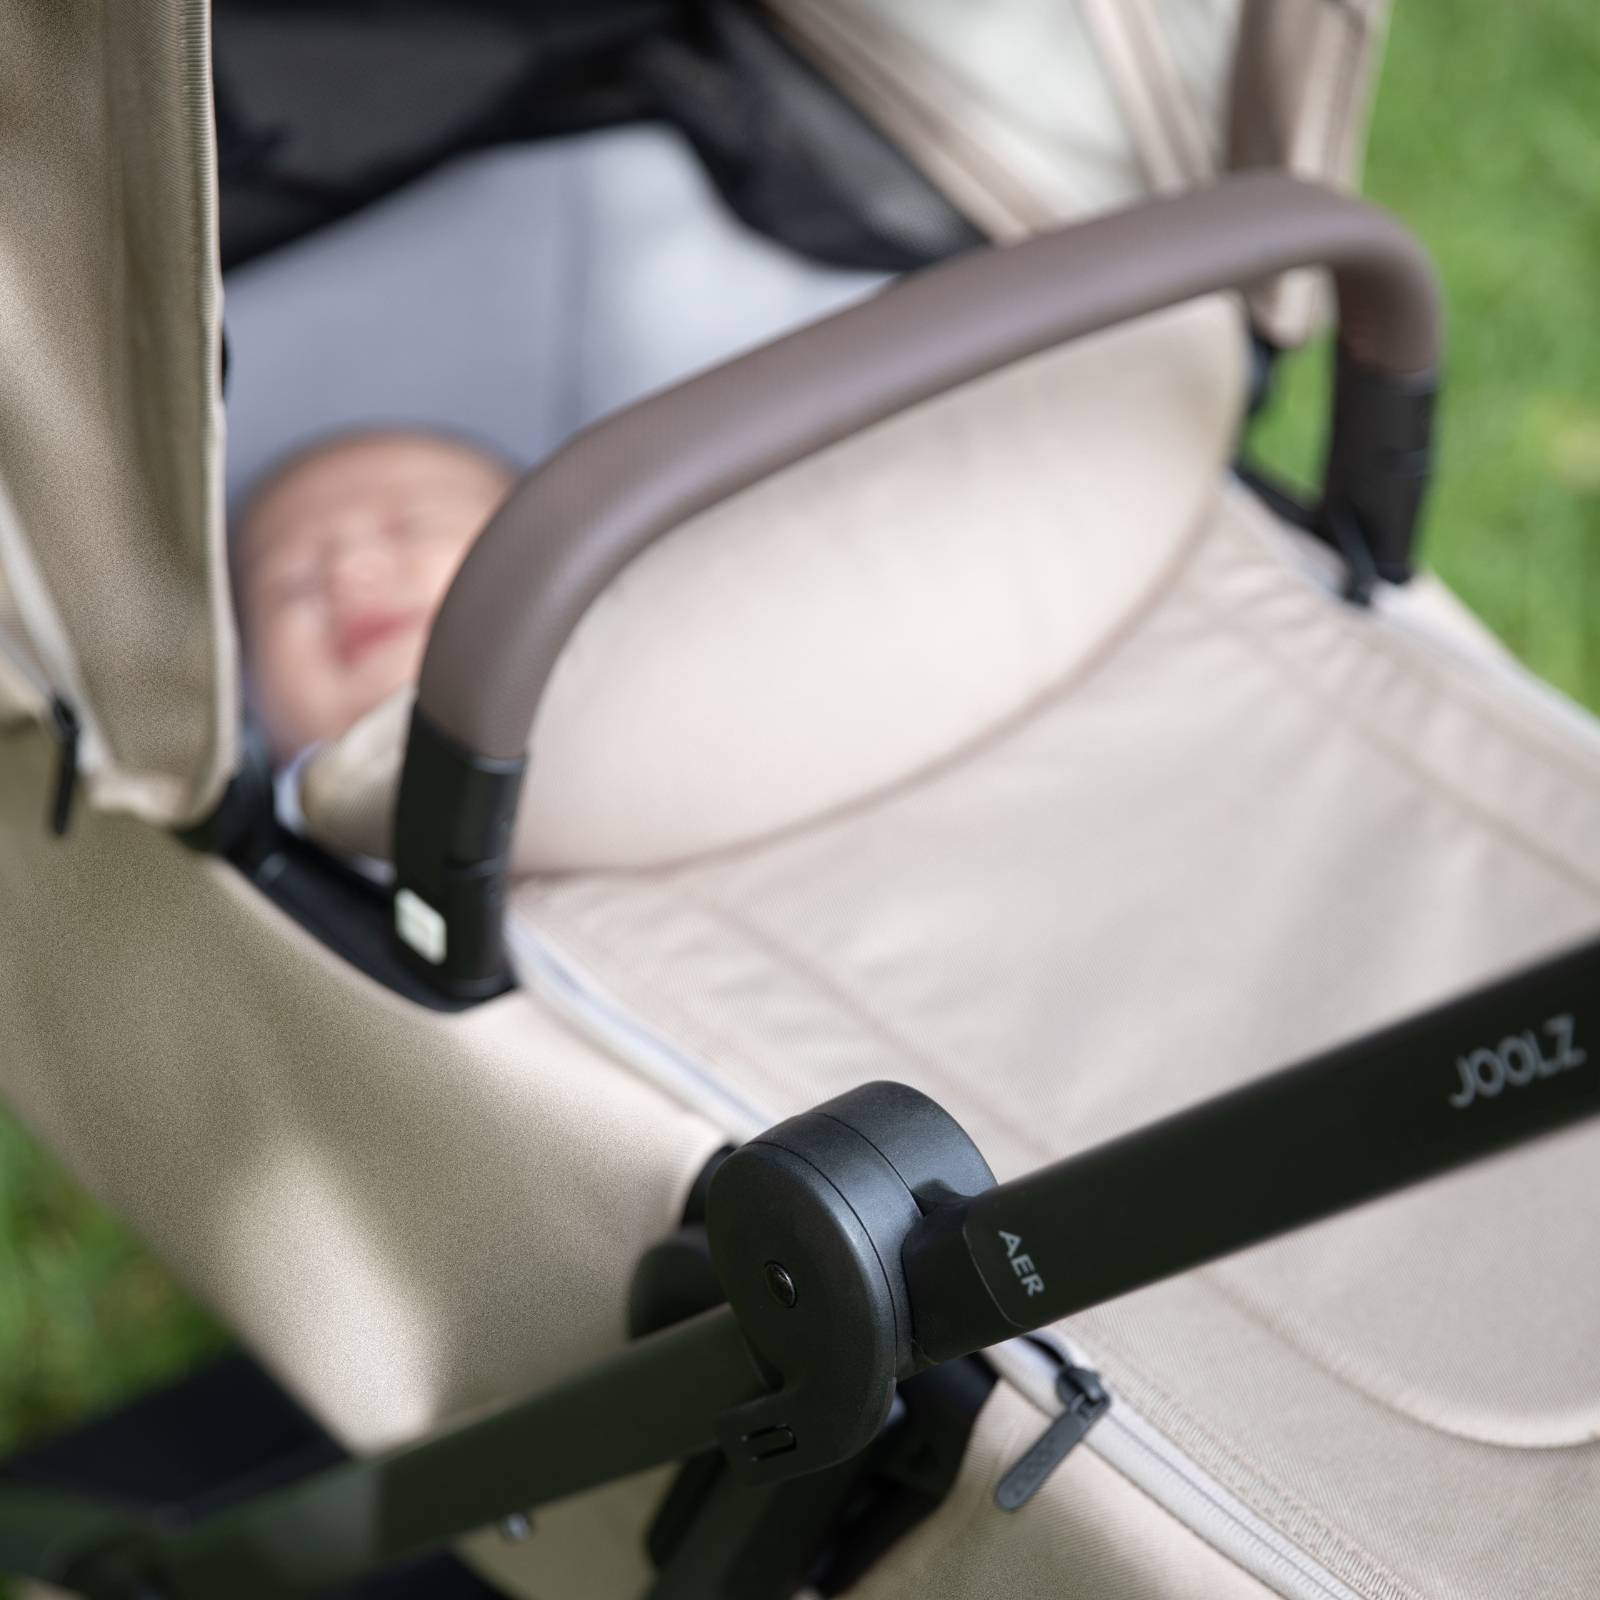 Joolz Aer+ compact & lightweight stroller Cot zoomed in on baby